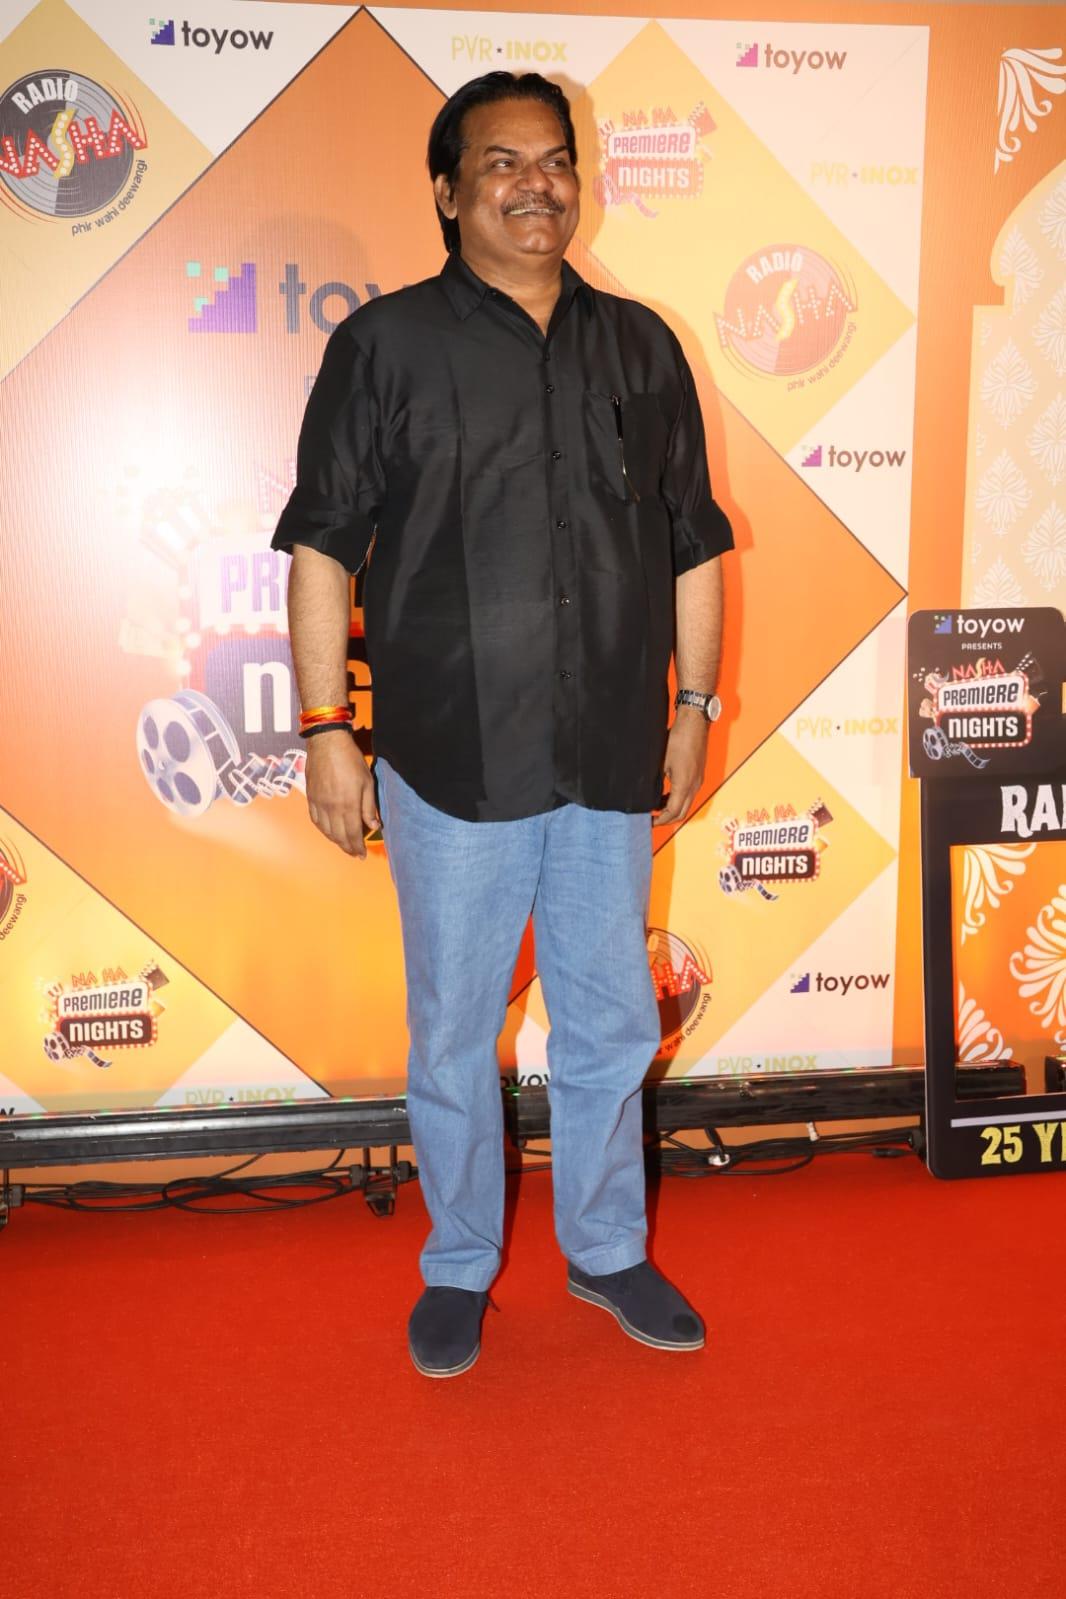 
Akhilendra Mishra posed for the paparazzi at the red carpet of the screening
